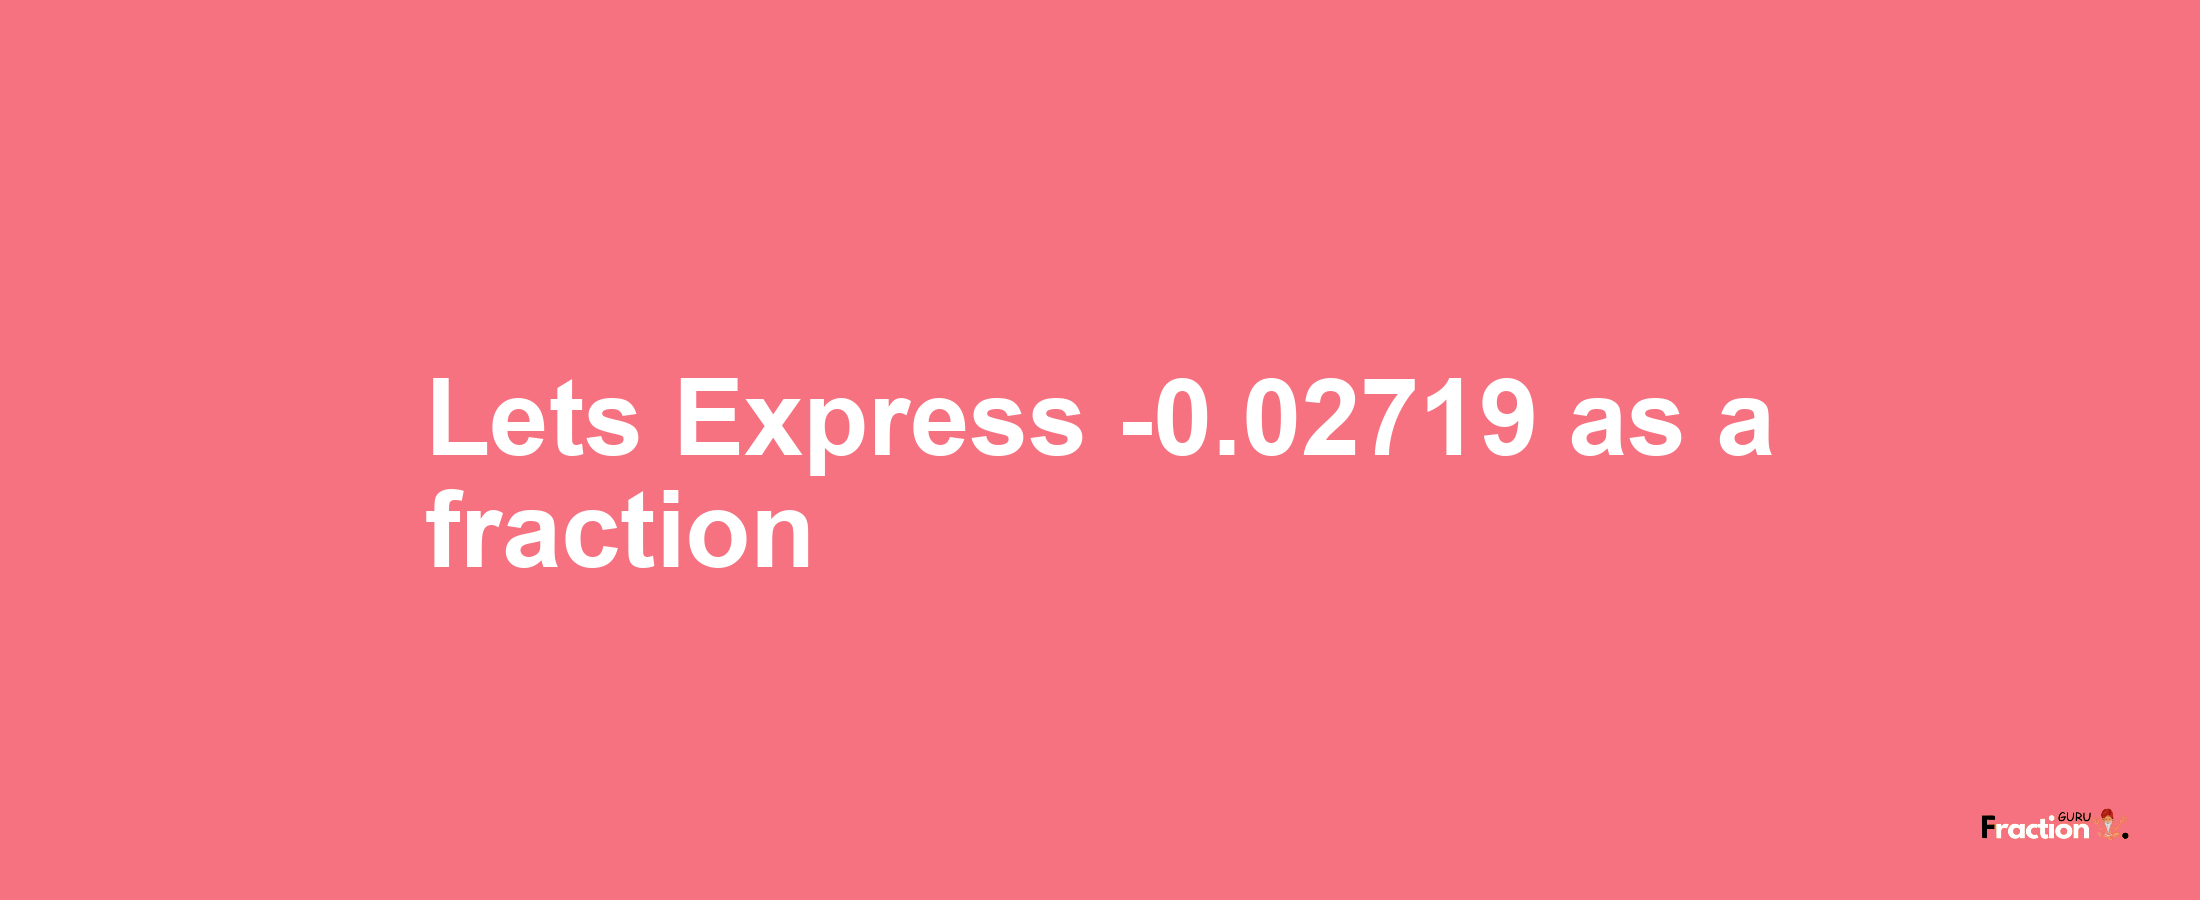 Lets Express -0.02719 as afraction